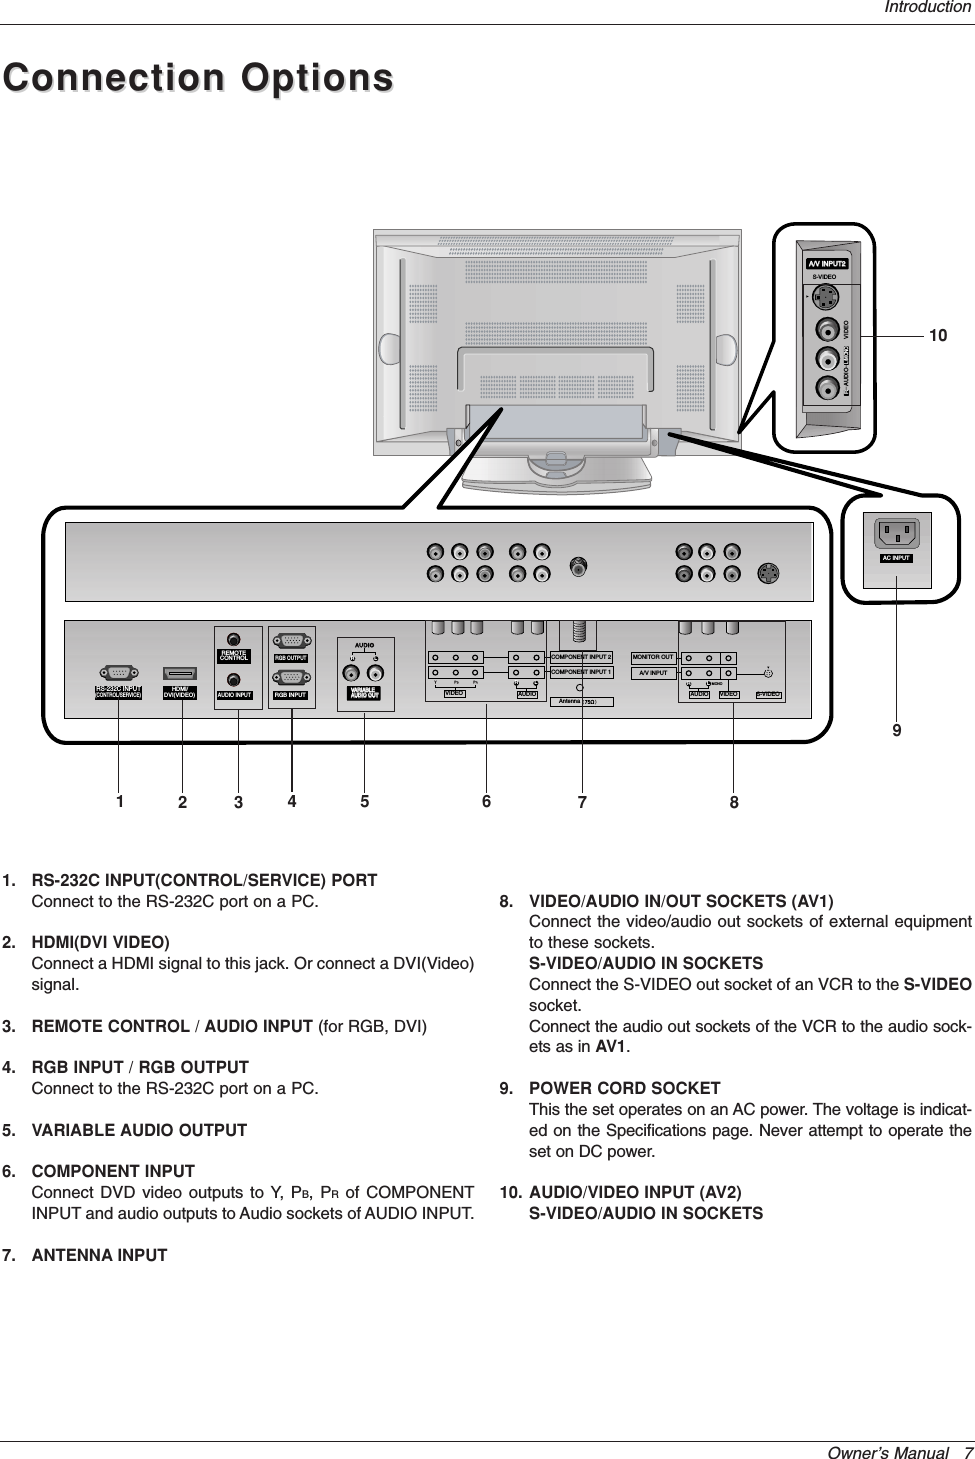 Owner’s Manual   7IntroductionConnection OptionsConnection OptionsS-VIDEOVIDEOAUDIORL/MONOA/V INPUT2A/V INPUT2AC INPUTRS-232C INPUT(CONTROL/SERVICE)AUDIO LR REMOTECONTROLAUDIO INPUTRGB INPUTVARIABLE ARIABLE AUDIO OUTAUDIO OUT     HDMI/DVI(VIDEO)RGB OUTPUTAntennaS-VIDEOCOMPONENT INPUT 2COMPONENT INPUT 1AUDIOVIDEORLAUDIO VIDEORMONITOR OUTA/V INPUTLMONO152 3 6897101. RS-232C INPUT(CONTROL/SERVICE) PORTConnect to the RS-232C port on a PC.2. HDMI(DVI VIDEO)Connect a HDMI signal to this jack. Or connect a DVI(Video)signal.3. REMOTE CONTROL / AUDIO INPUT (for RGB, DVI)4. RGB INPUT / RGB OUTPUTConnect to the RS-232C port on a PC.5. VARIABLE AUDIO OUTPUT6. COMPONENT INPUTConnect DVD video outputs to Y, PB, PRof COMPONENTINPUT and audio outputs to Audio sockets of AUDIO INPUT.7. ANTENNA INPUT8. VIDEO/AUDIO IN/OUT SOCKETS (AV1)Connect the video/audio out sockets of external equipmentto these sockets.S-VIDEO/AUDIO IN SOCKETS Connect the S-VIDEO out socket of an VCR to the S-VIDEOsocket. Connect the audio out sockets of the VCR to the audio sock-ets as in AV1.9. POWER CORD SOCKETThis the set operates on an AC power. The voltage is indicat-ed on the Specifications page. Never attempt to operate theset on DC power.10. AUDIO/VIDEO INPUT (AV2)S-VIDEO/AUDIO IN SOCKETS4